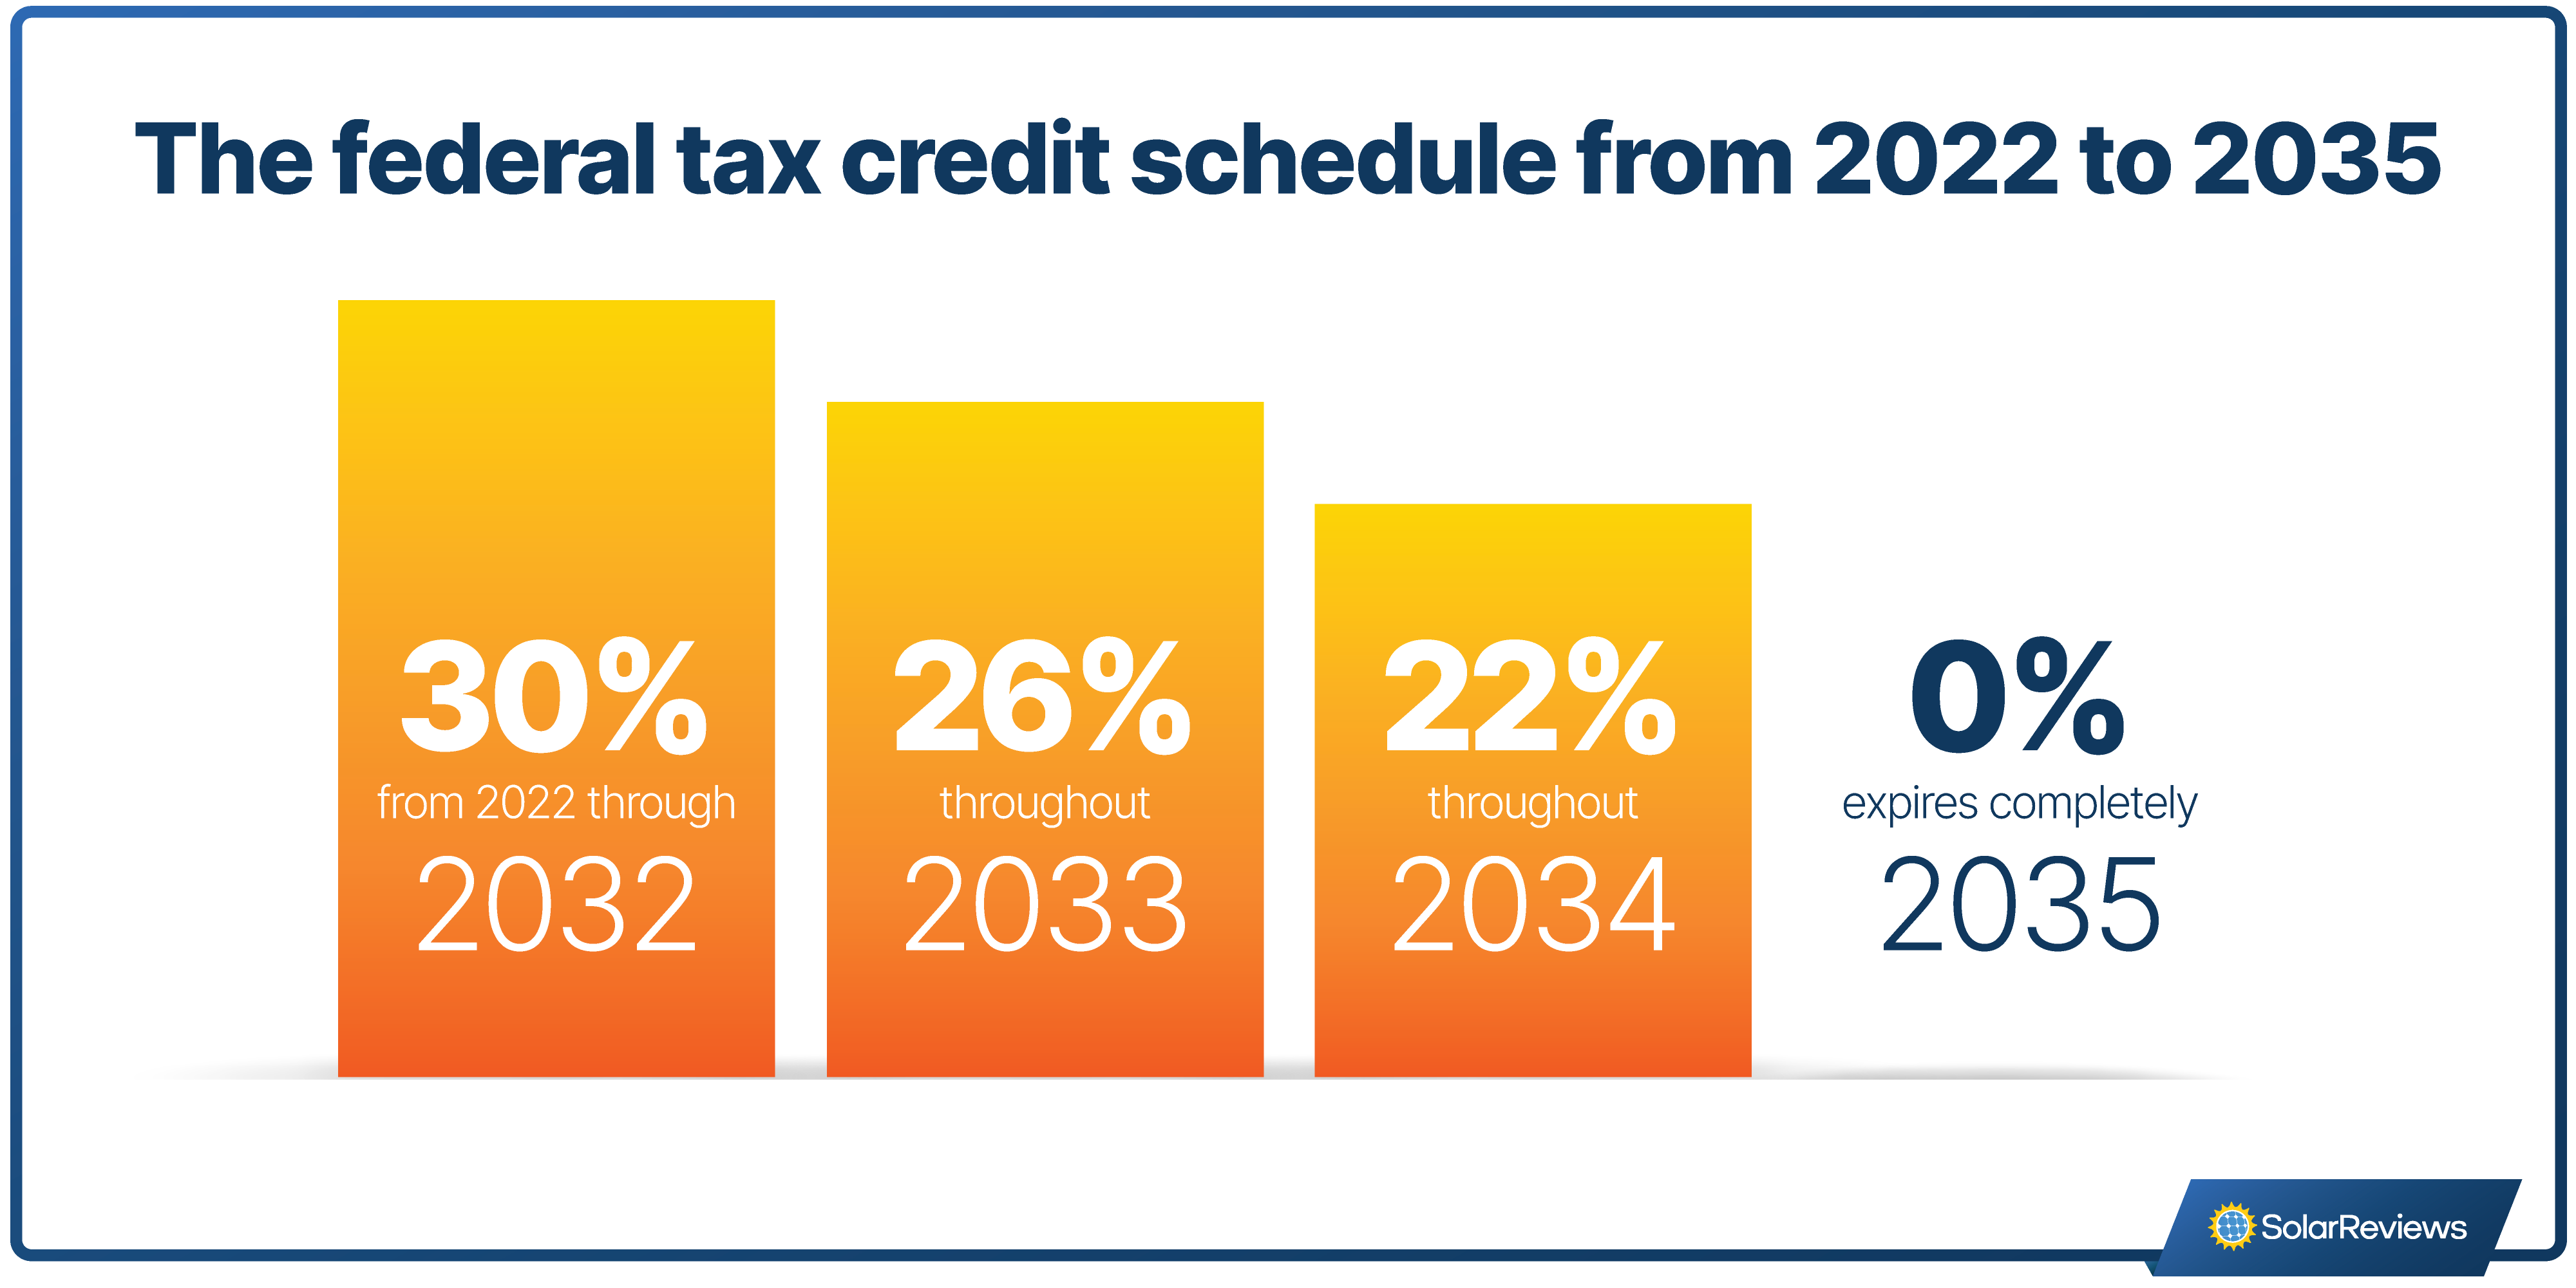 Bar graph showing the step down schedule of the federal tax credit. The solar tax credit is equal to 30% of solar installation costs until 2032, in 2033 its value falls to 26%, in 2034 it falls to 22%, before it expires in 2035.